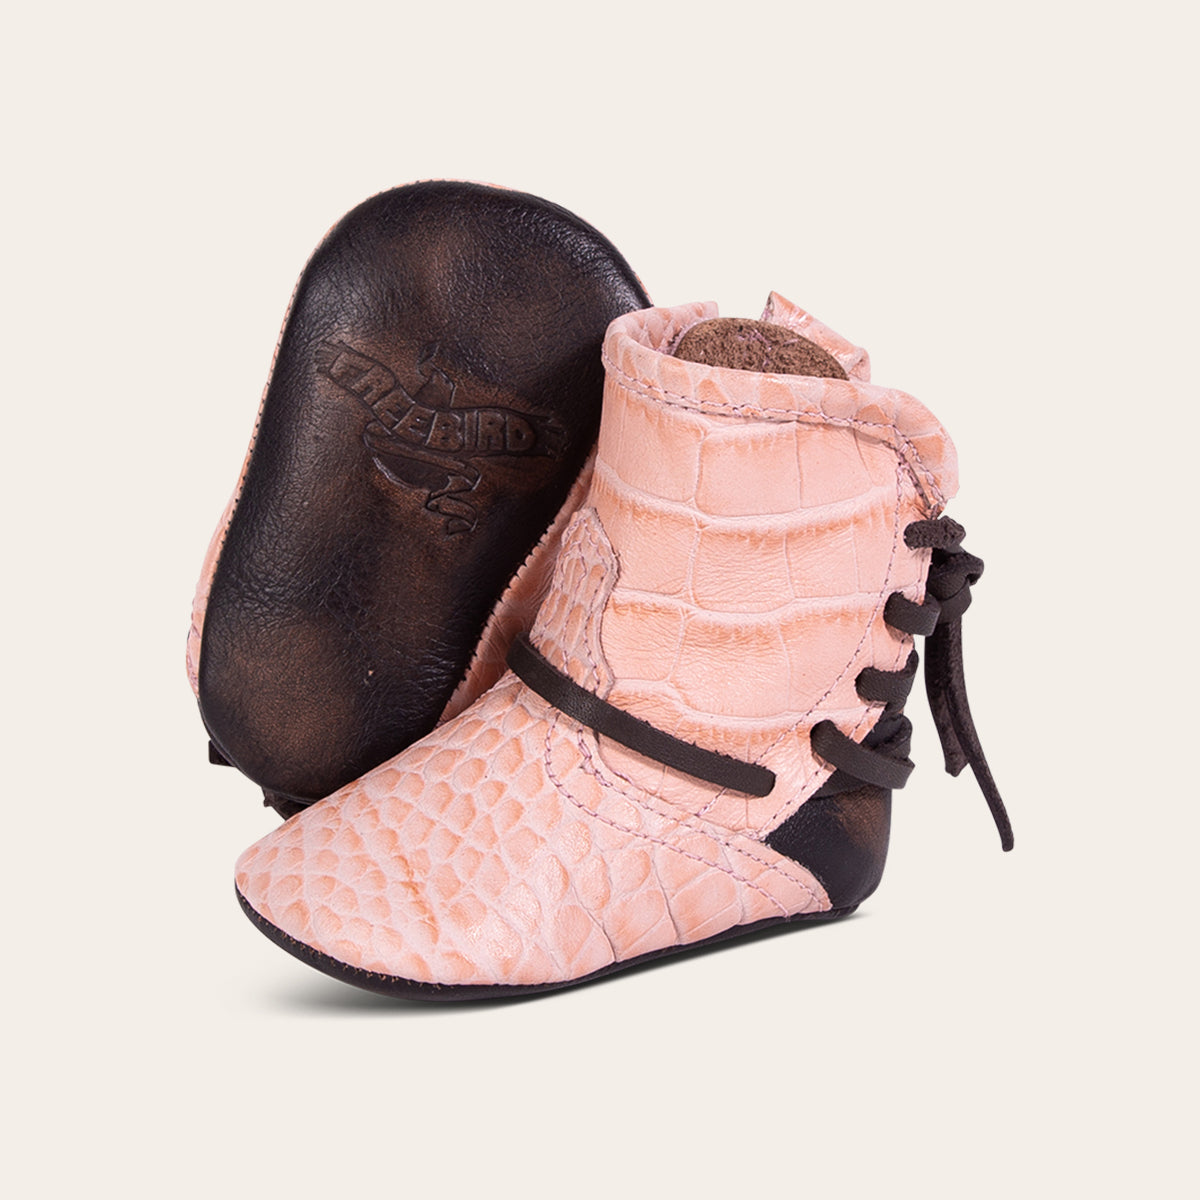 front view showing contrasting leather lace detailing and soft leather imprinted sole on FREEBIRD infant baby coal pink croco leather bootie 